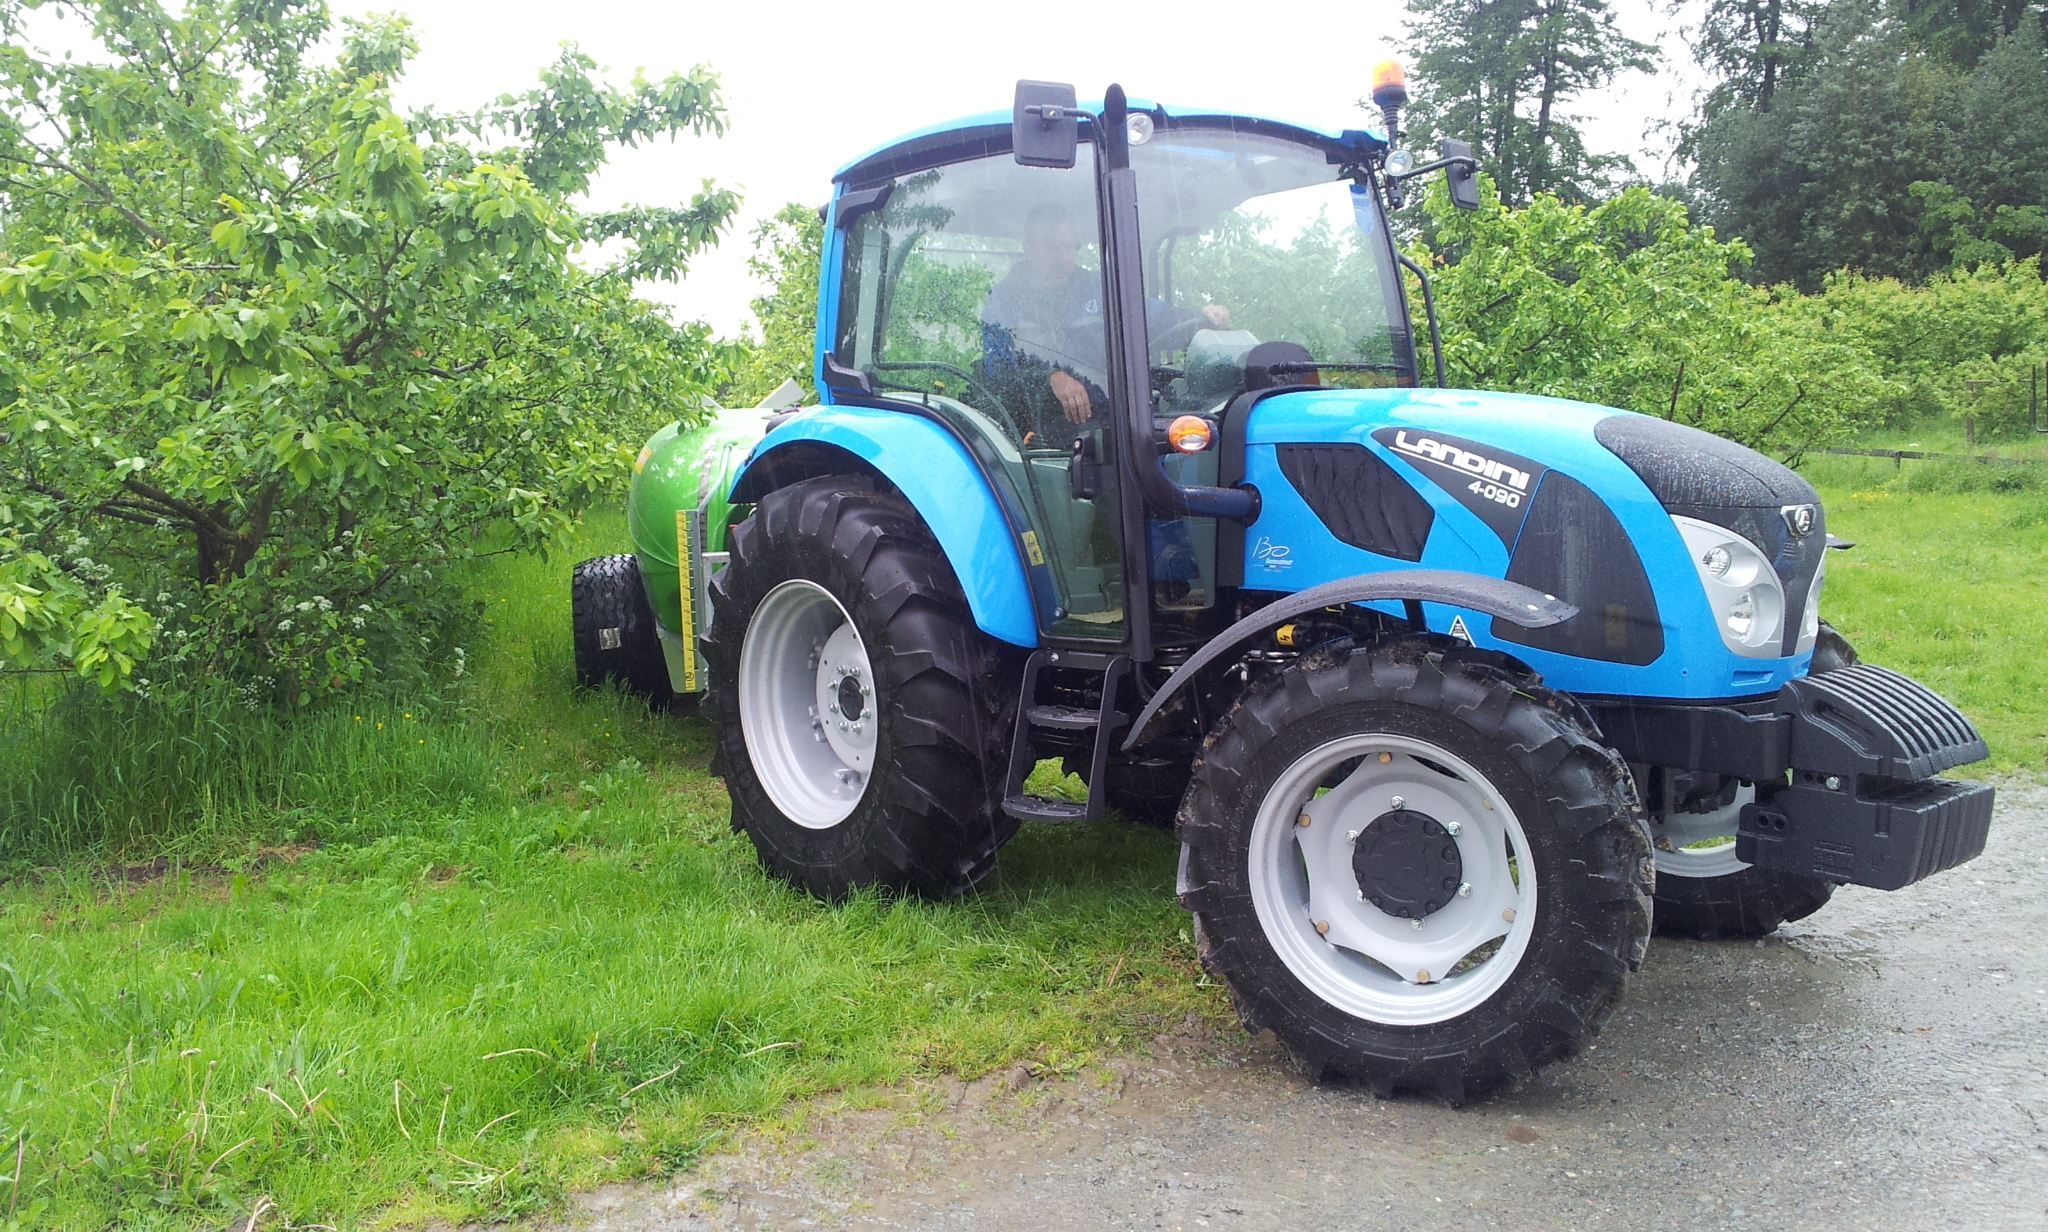 A tractor from the new Landini 4 Series range